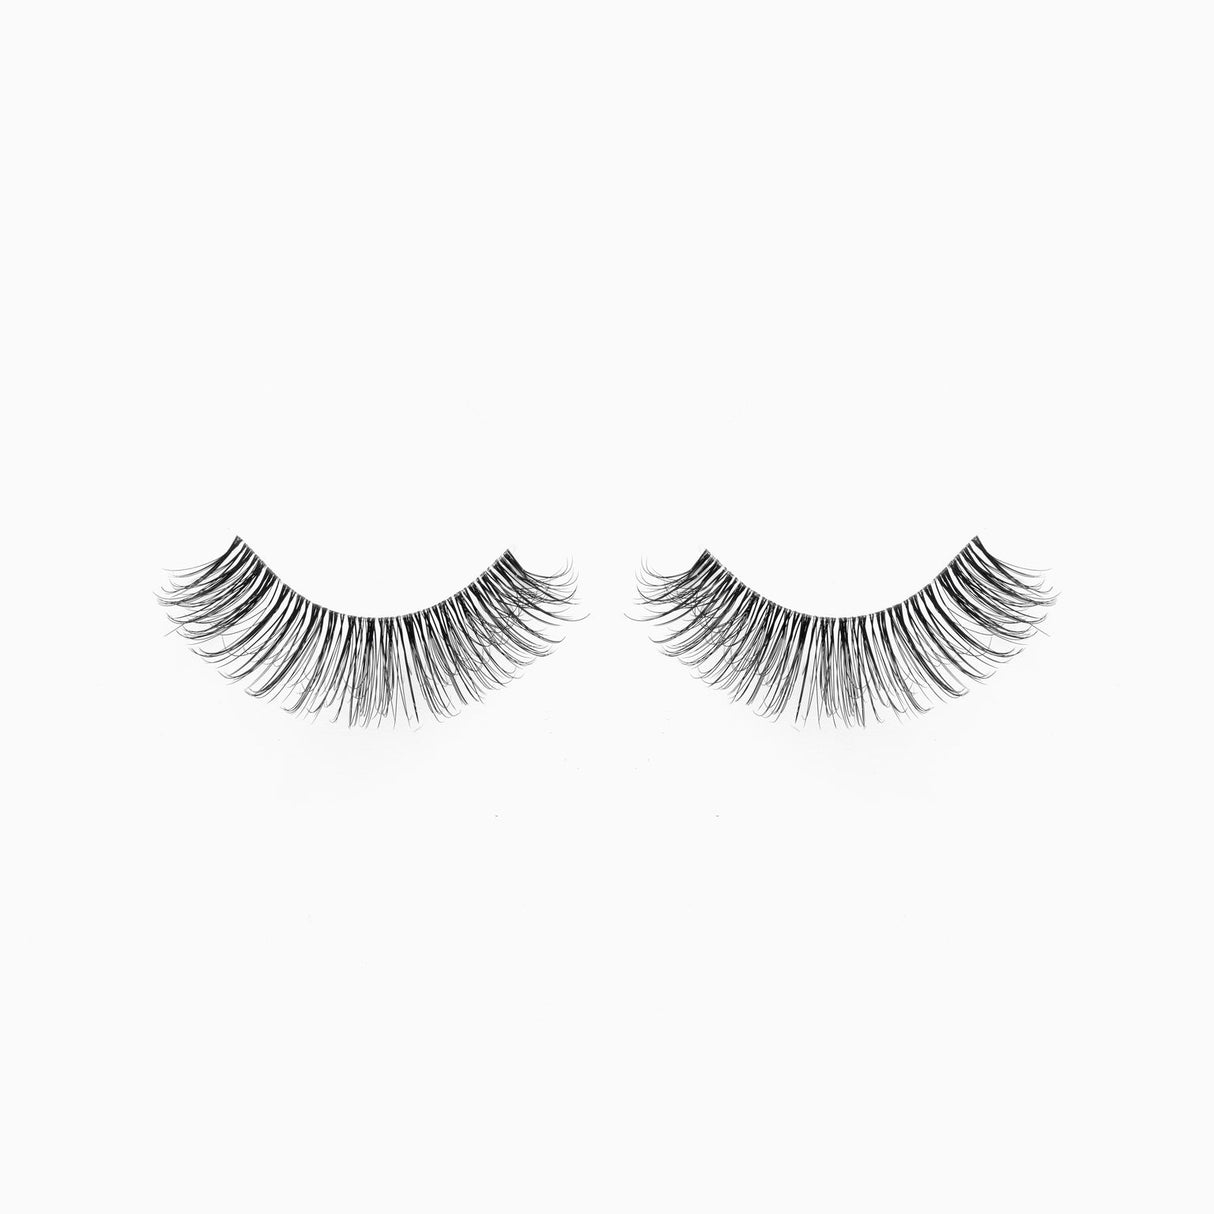 BEAUTY CREATIONS - TAKE ME SOMEWHERE LASHES COLLECTION